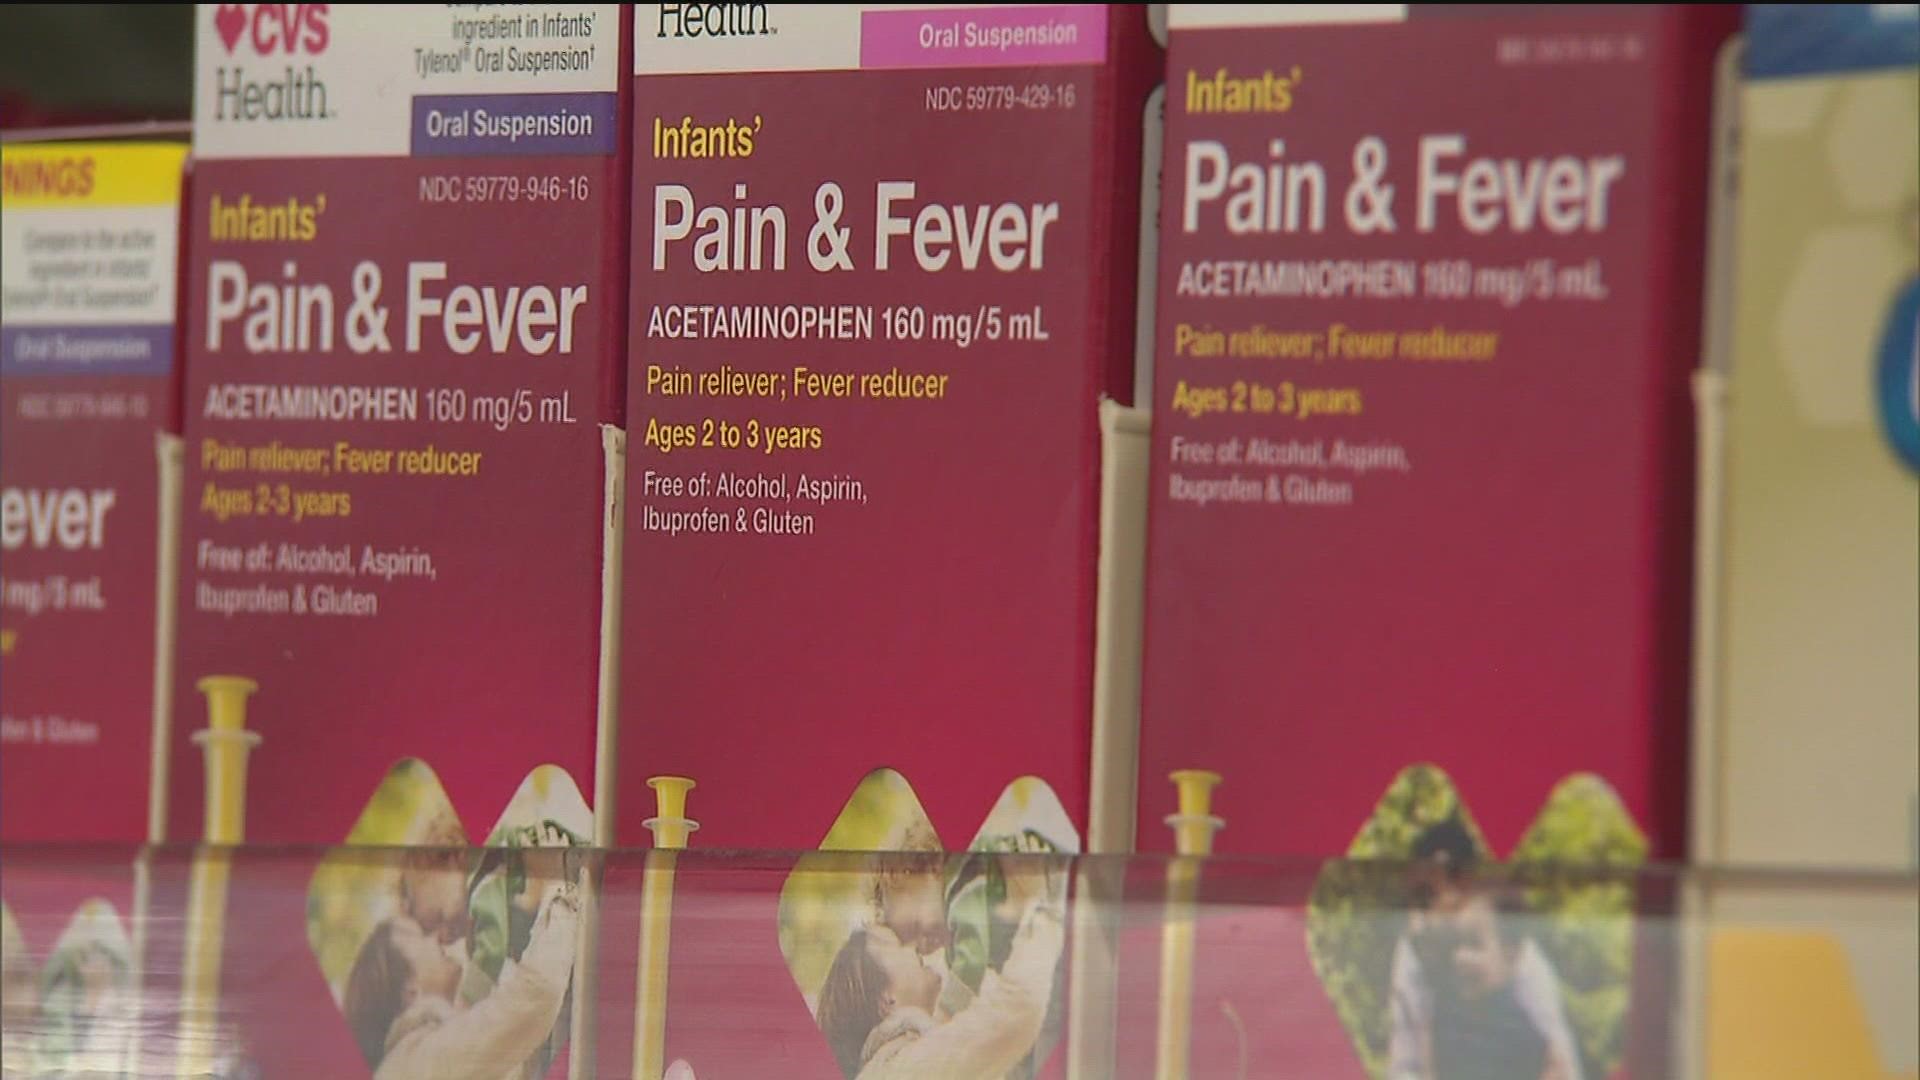 Cases of RSV, flu and COVID have left shelves across the country scarce.